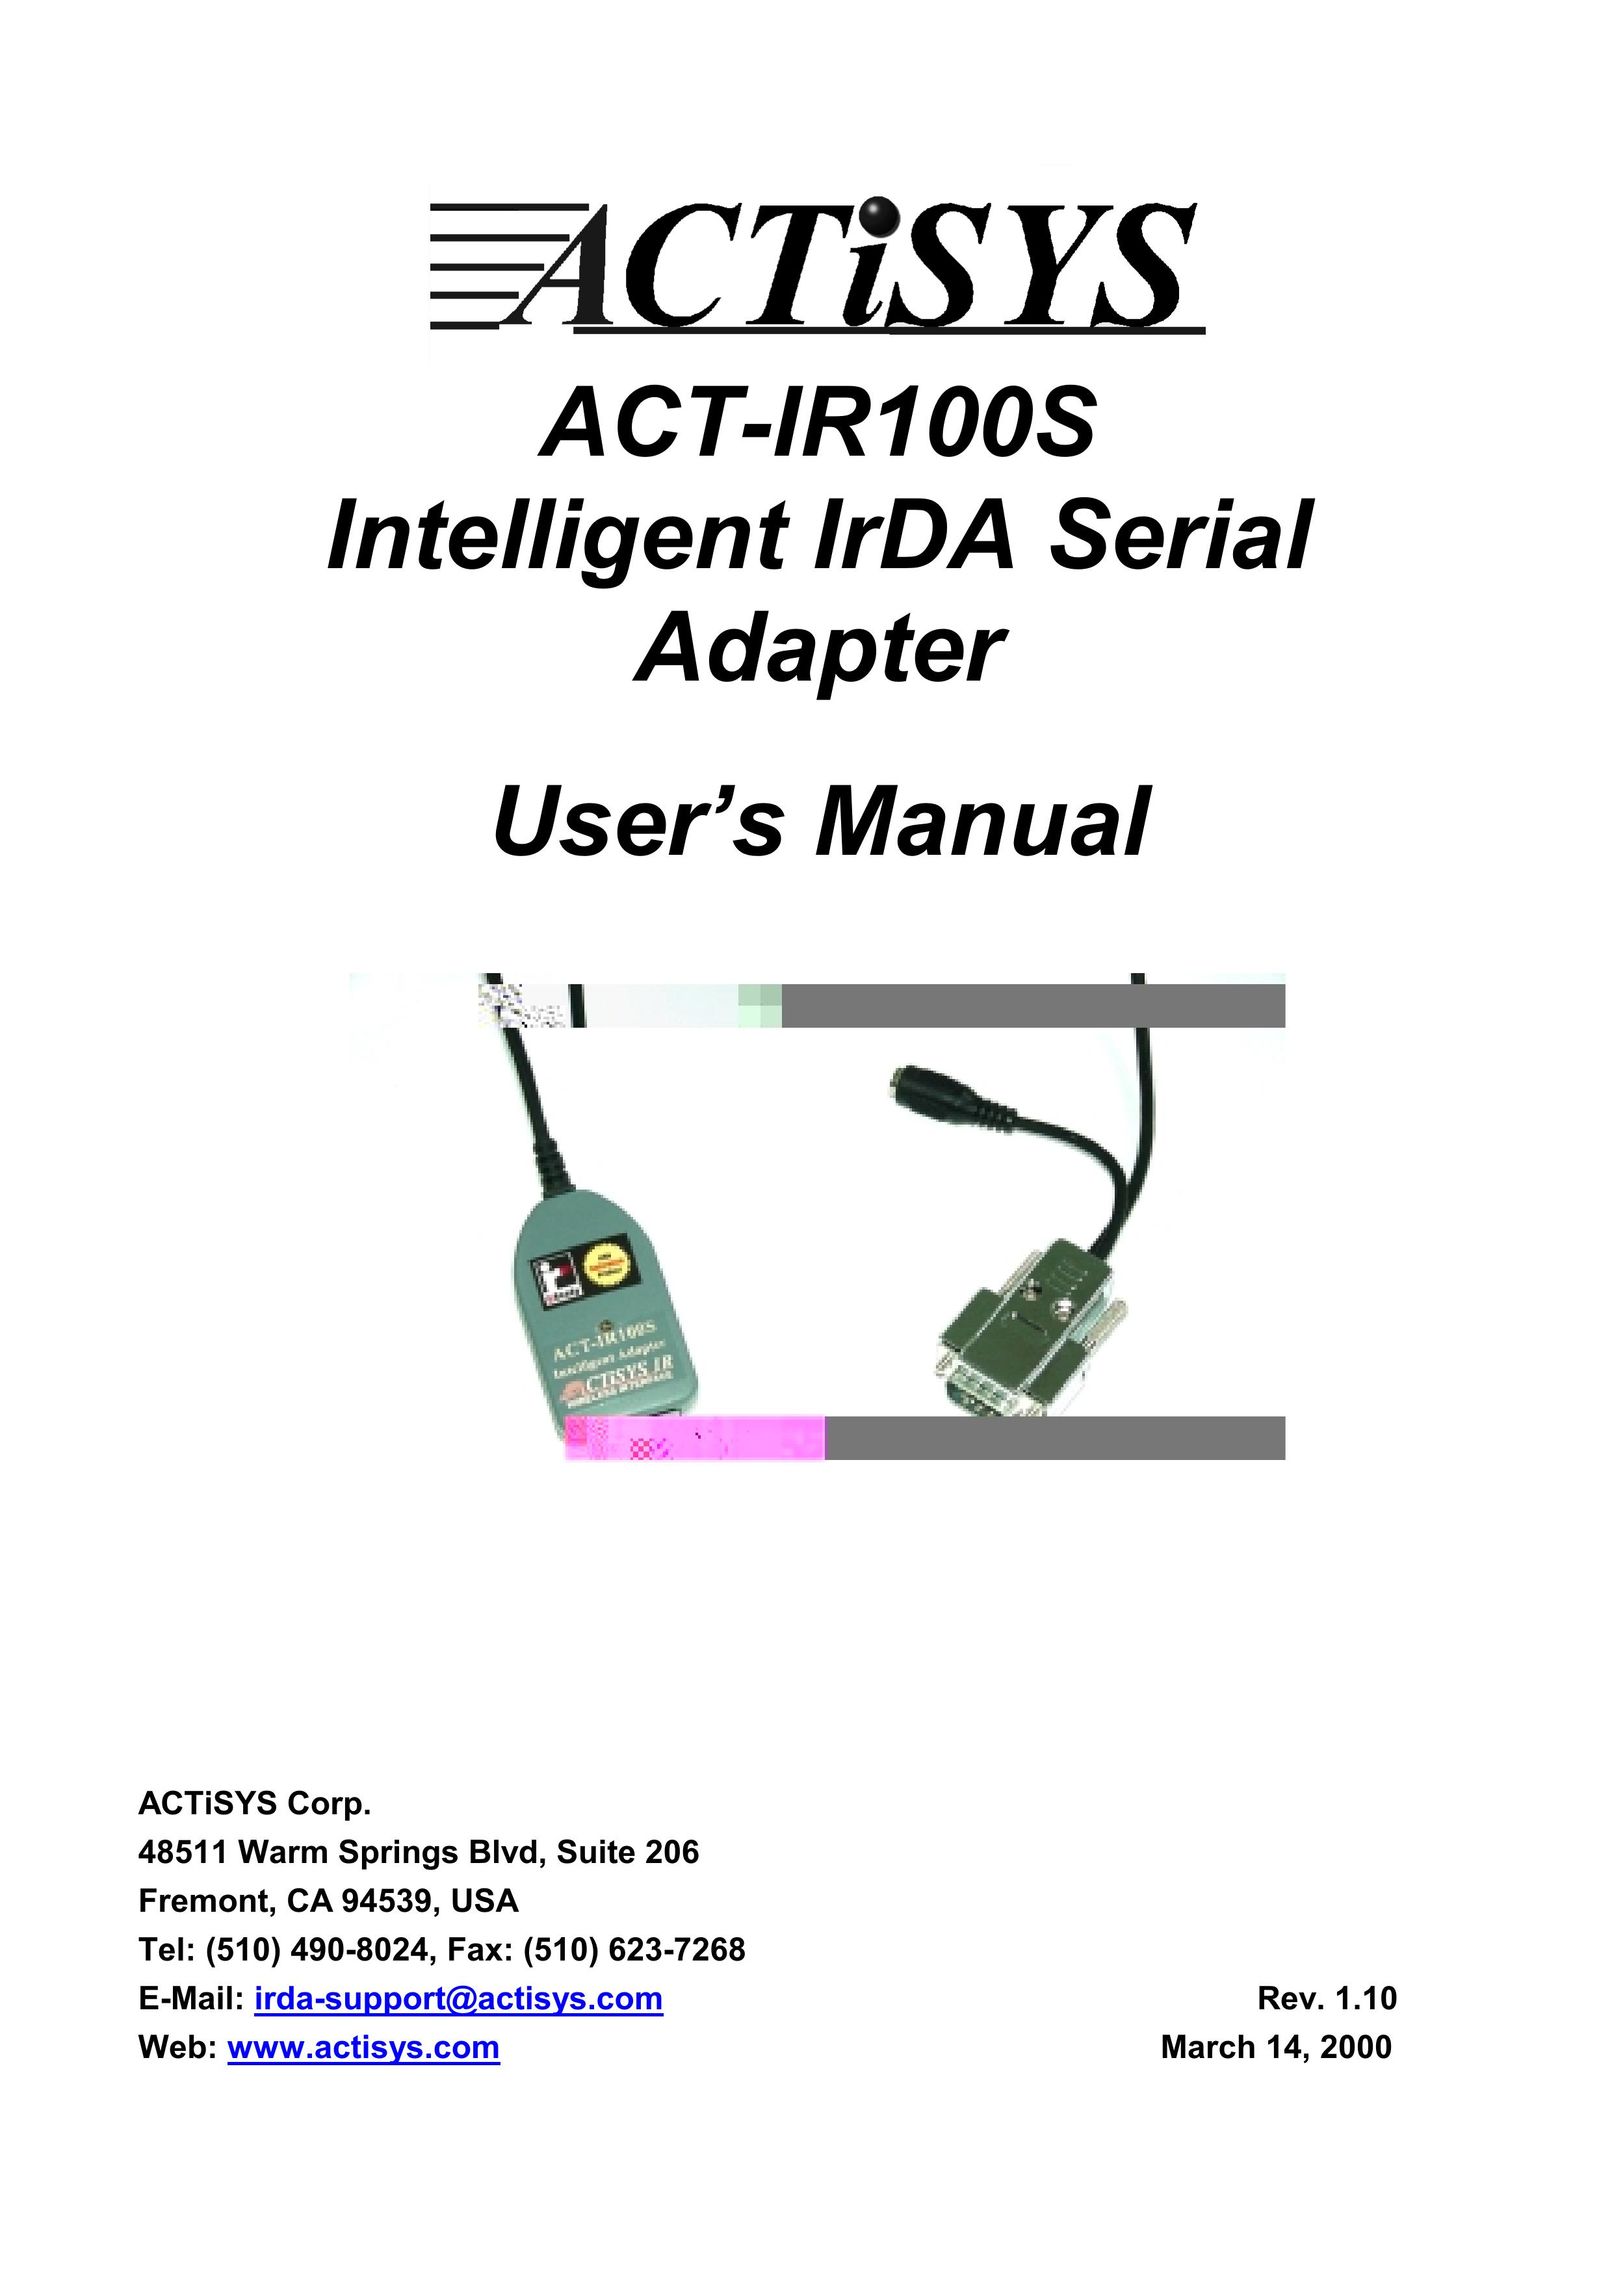 ACTiSYS ACT-IR100S Network Card User Manual (Page 1)